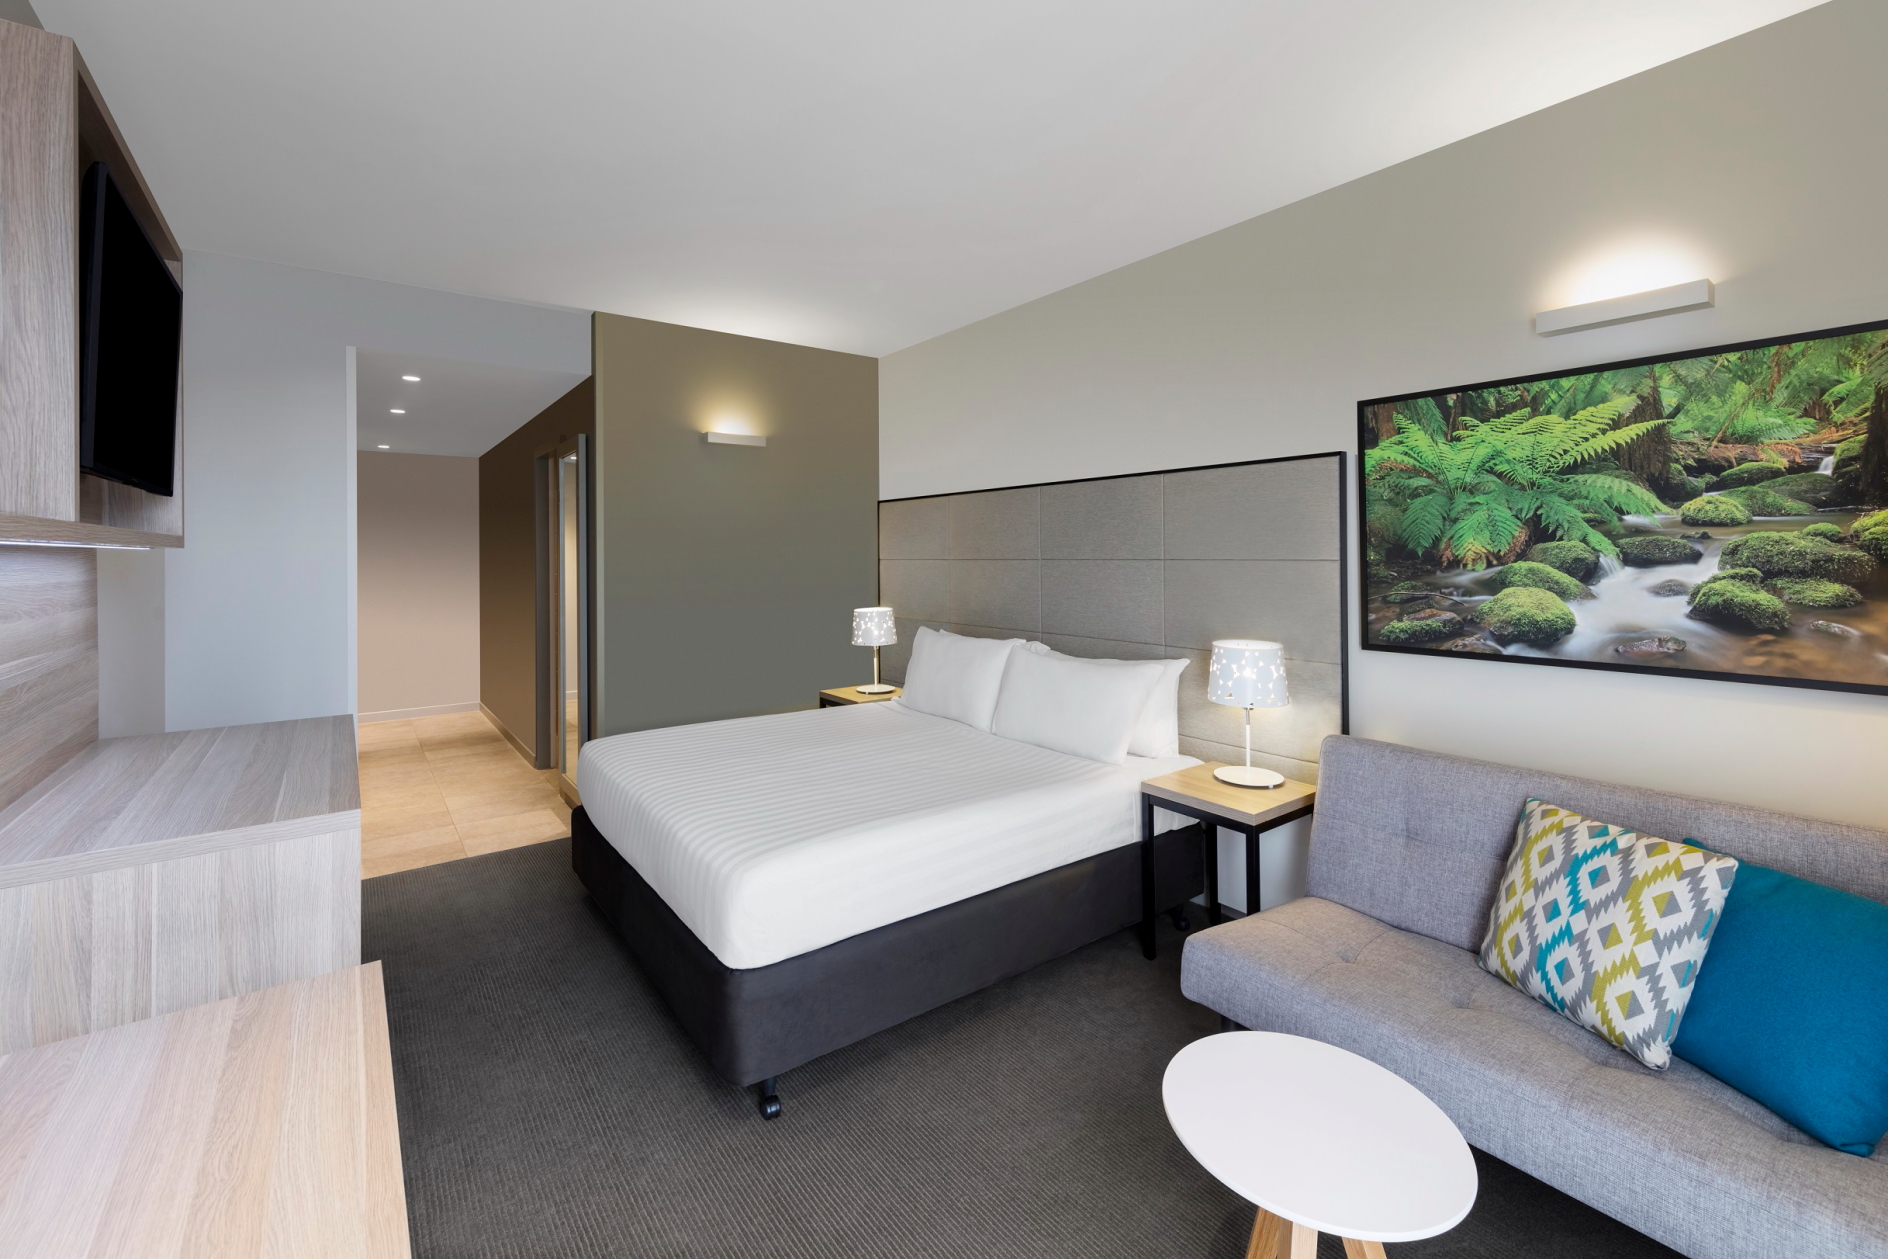 Peppers Marysville is the fourth hotel that The Shakespeare Property Group has partnered with Accor on in Australia, following the success of Novotel Sunshine Coast Resort, Pullman Cairns International and Novotel Cairns Oasis Resort. Click to enlarge.